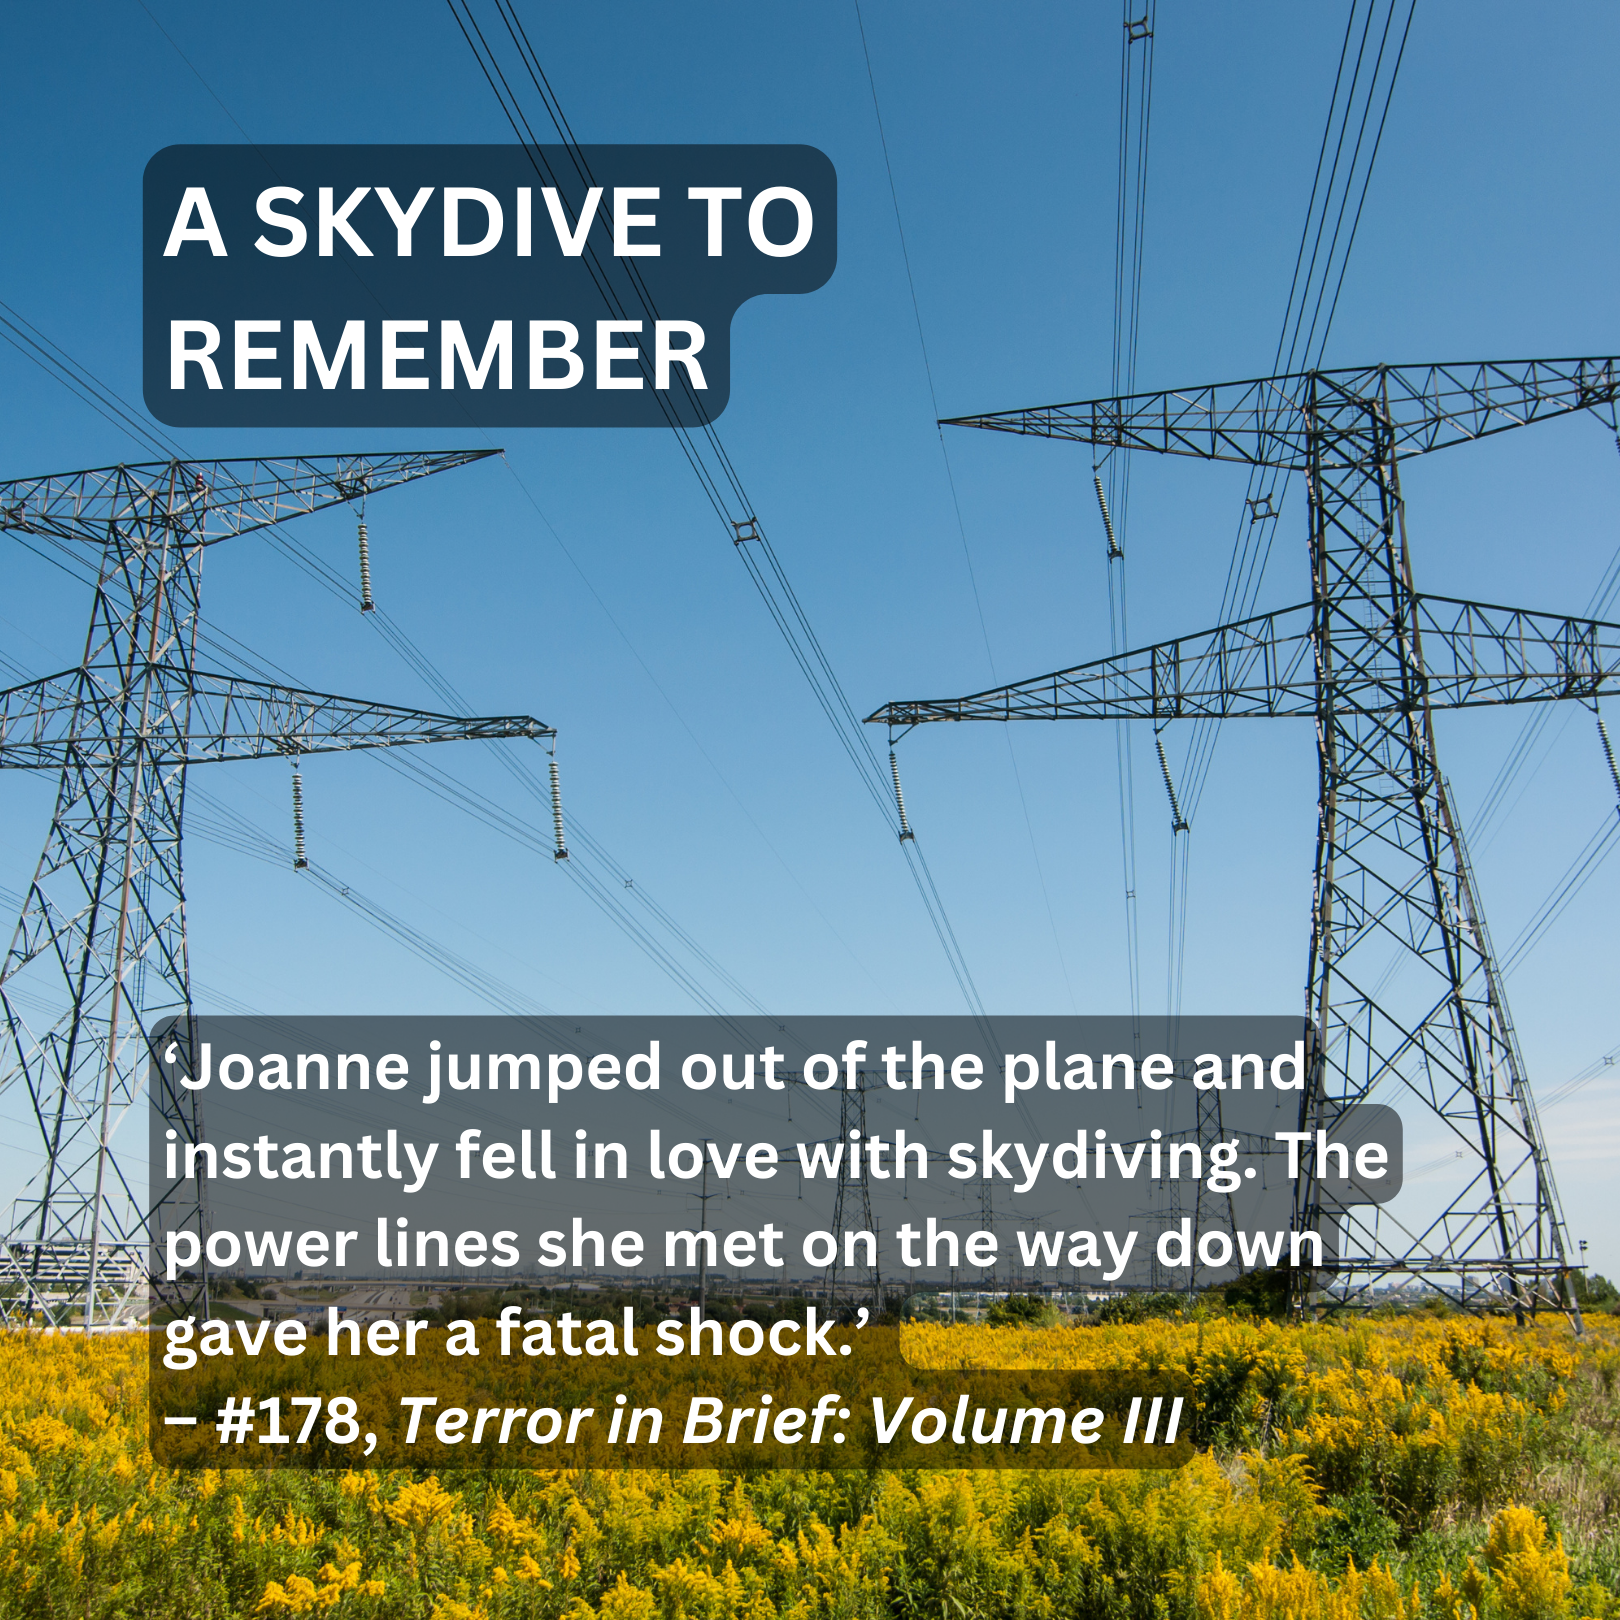 A Skydive to Remember from Terror in Brief: Volume III